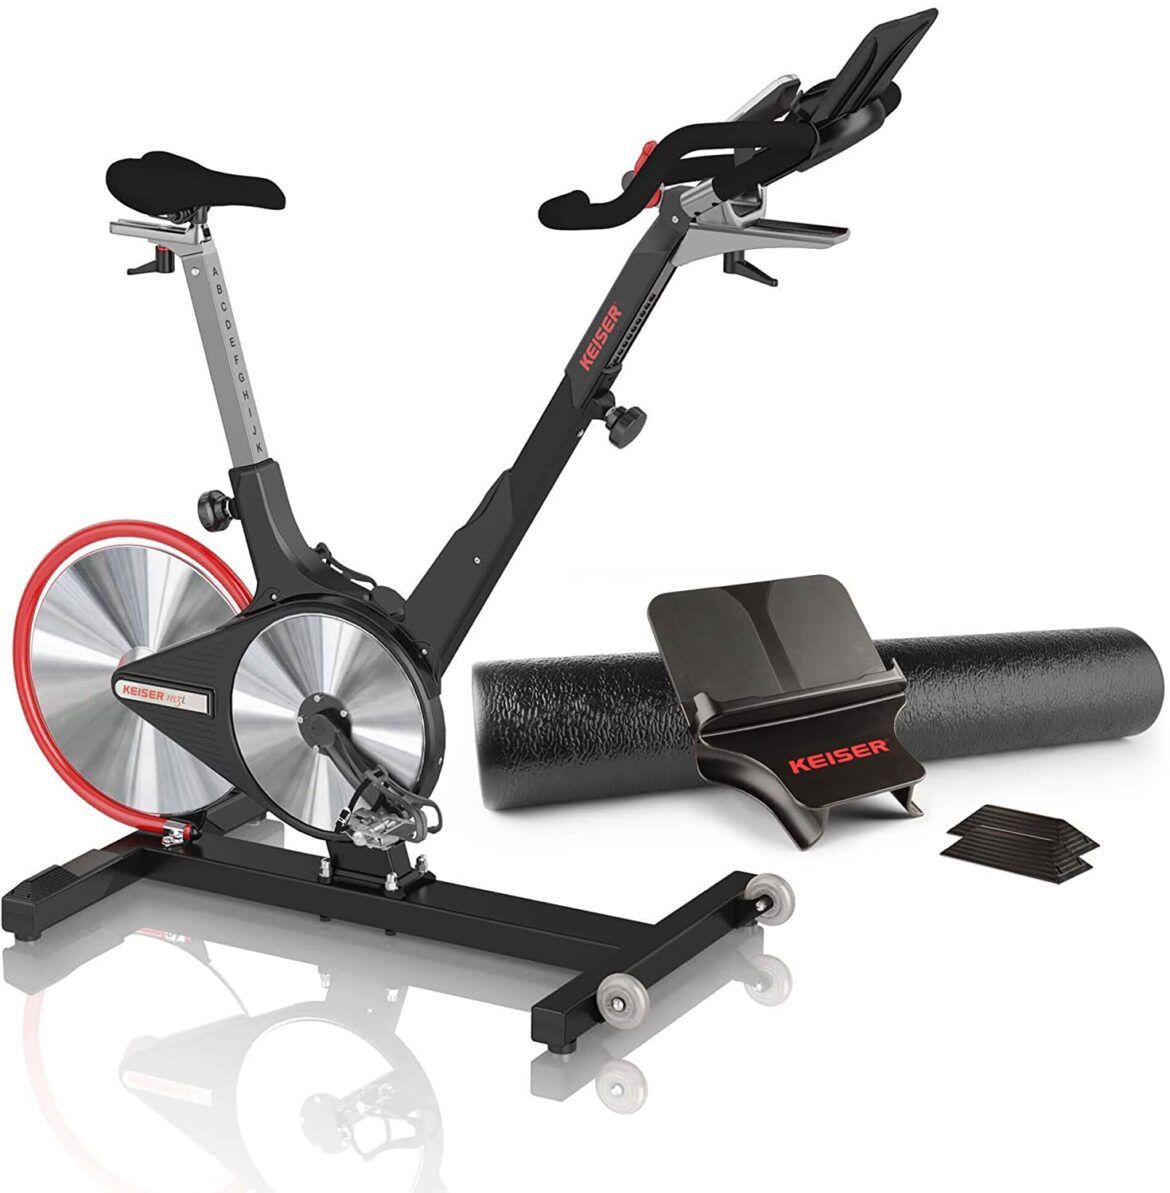 Best Home Spin Bike Seat and Exercise Equipment